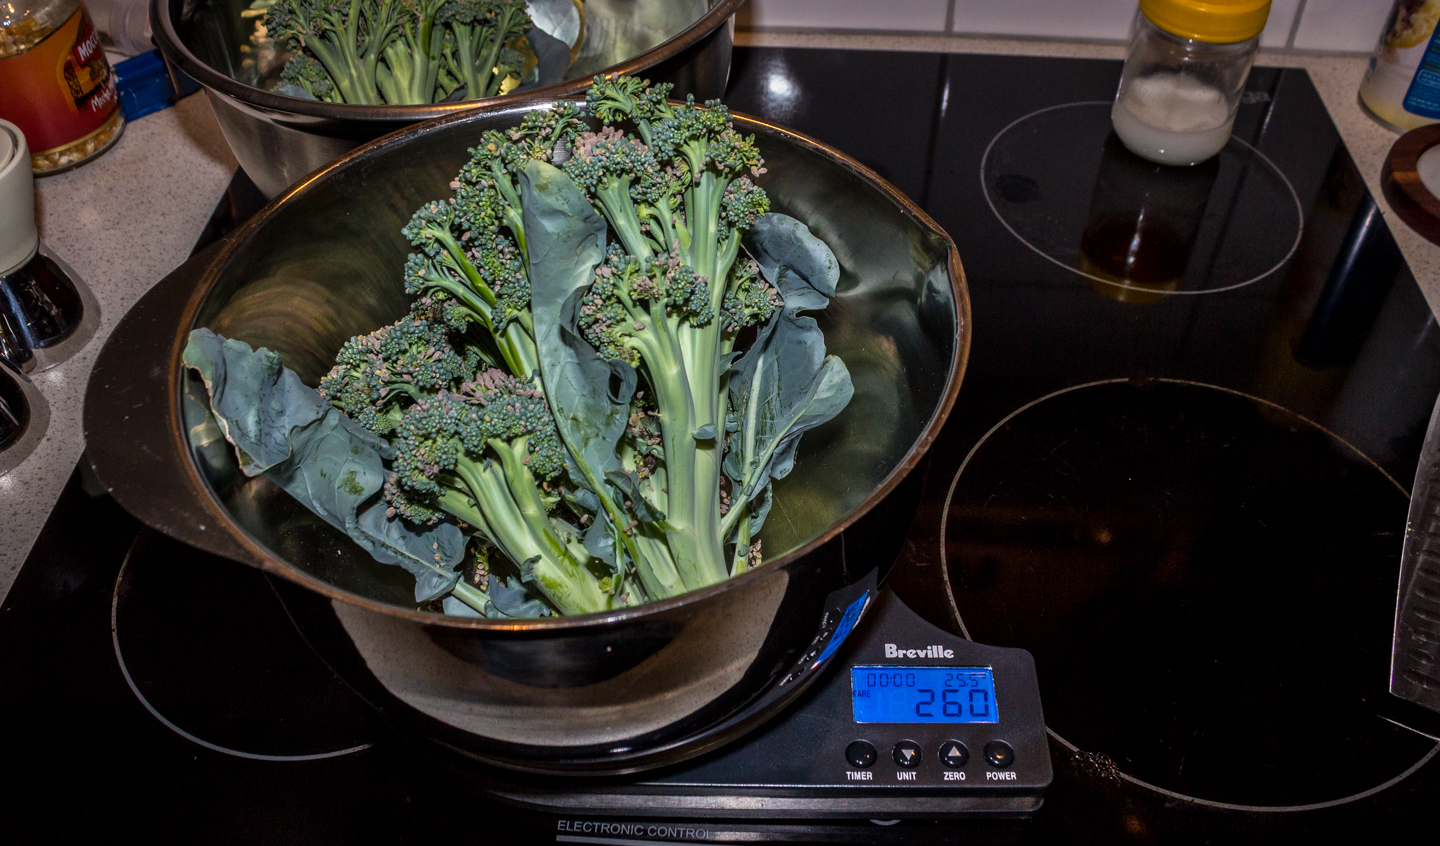 03/01/16 2nd broccoli harvested at 260g Also tough butsweet 1 of the 2 broccoli harvested and cooked for a friend and her kid:) Feedback from the kid, the broccoli is yummy